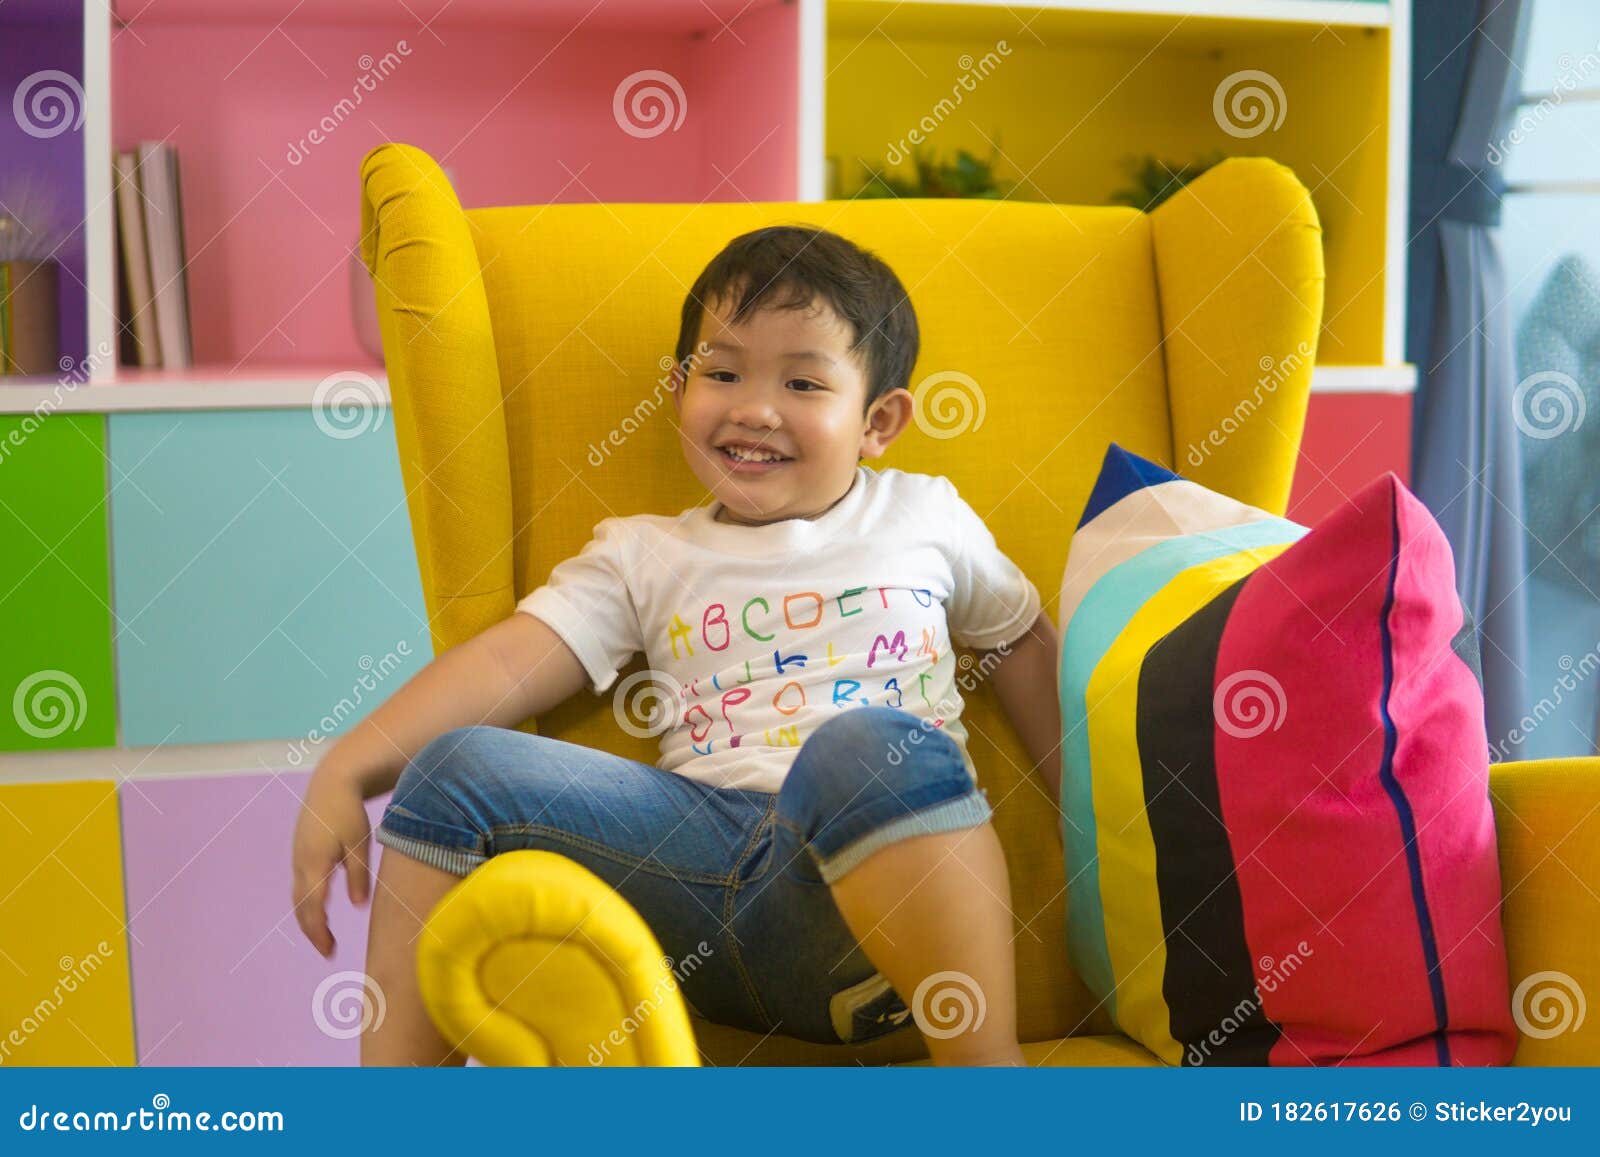 Little Boy Siting on a Sofa at Home Stock Photo - Image of baby ...